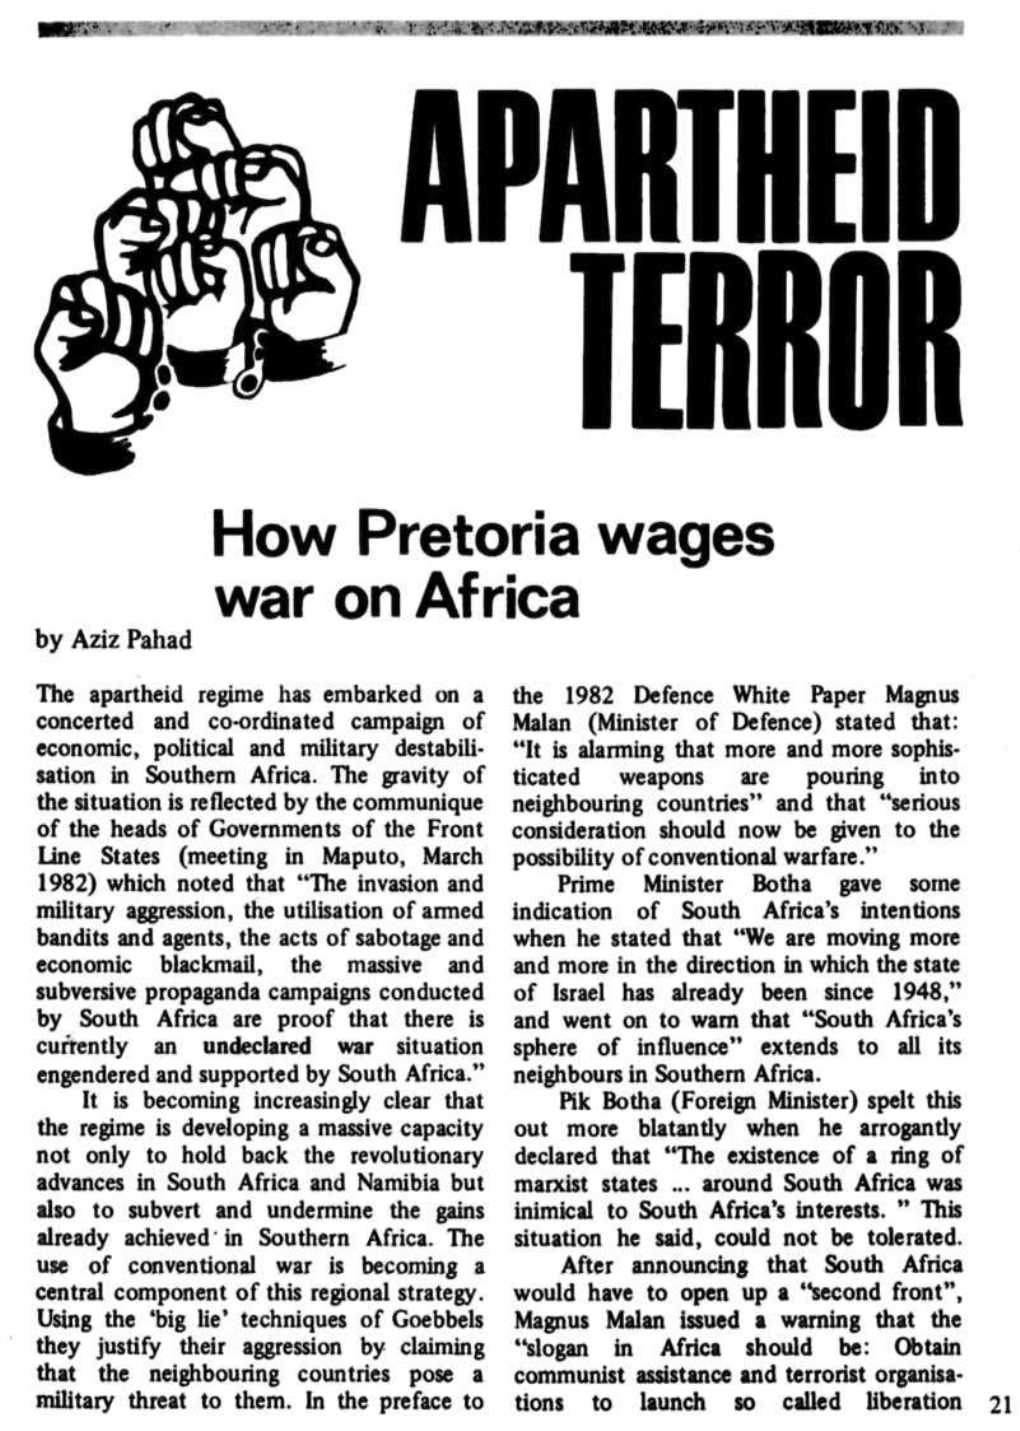 How Pretoria Wages War on Africa by Aziz Pahad